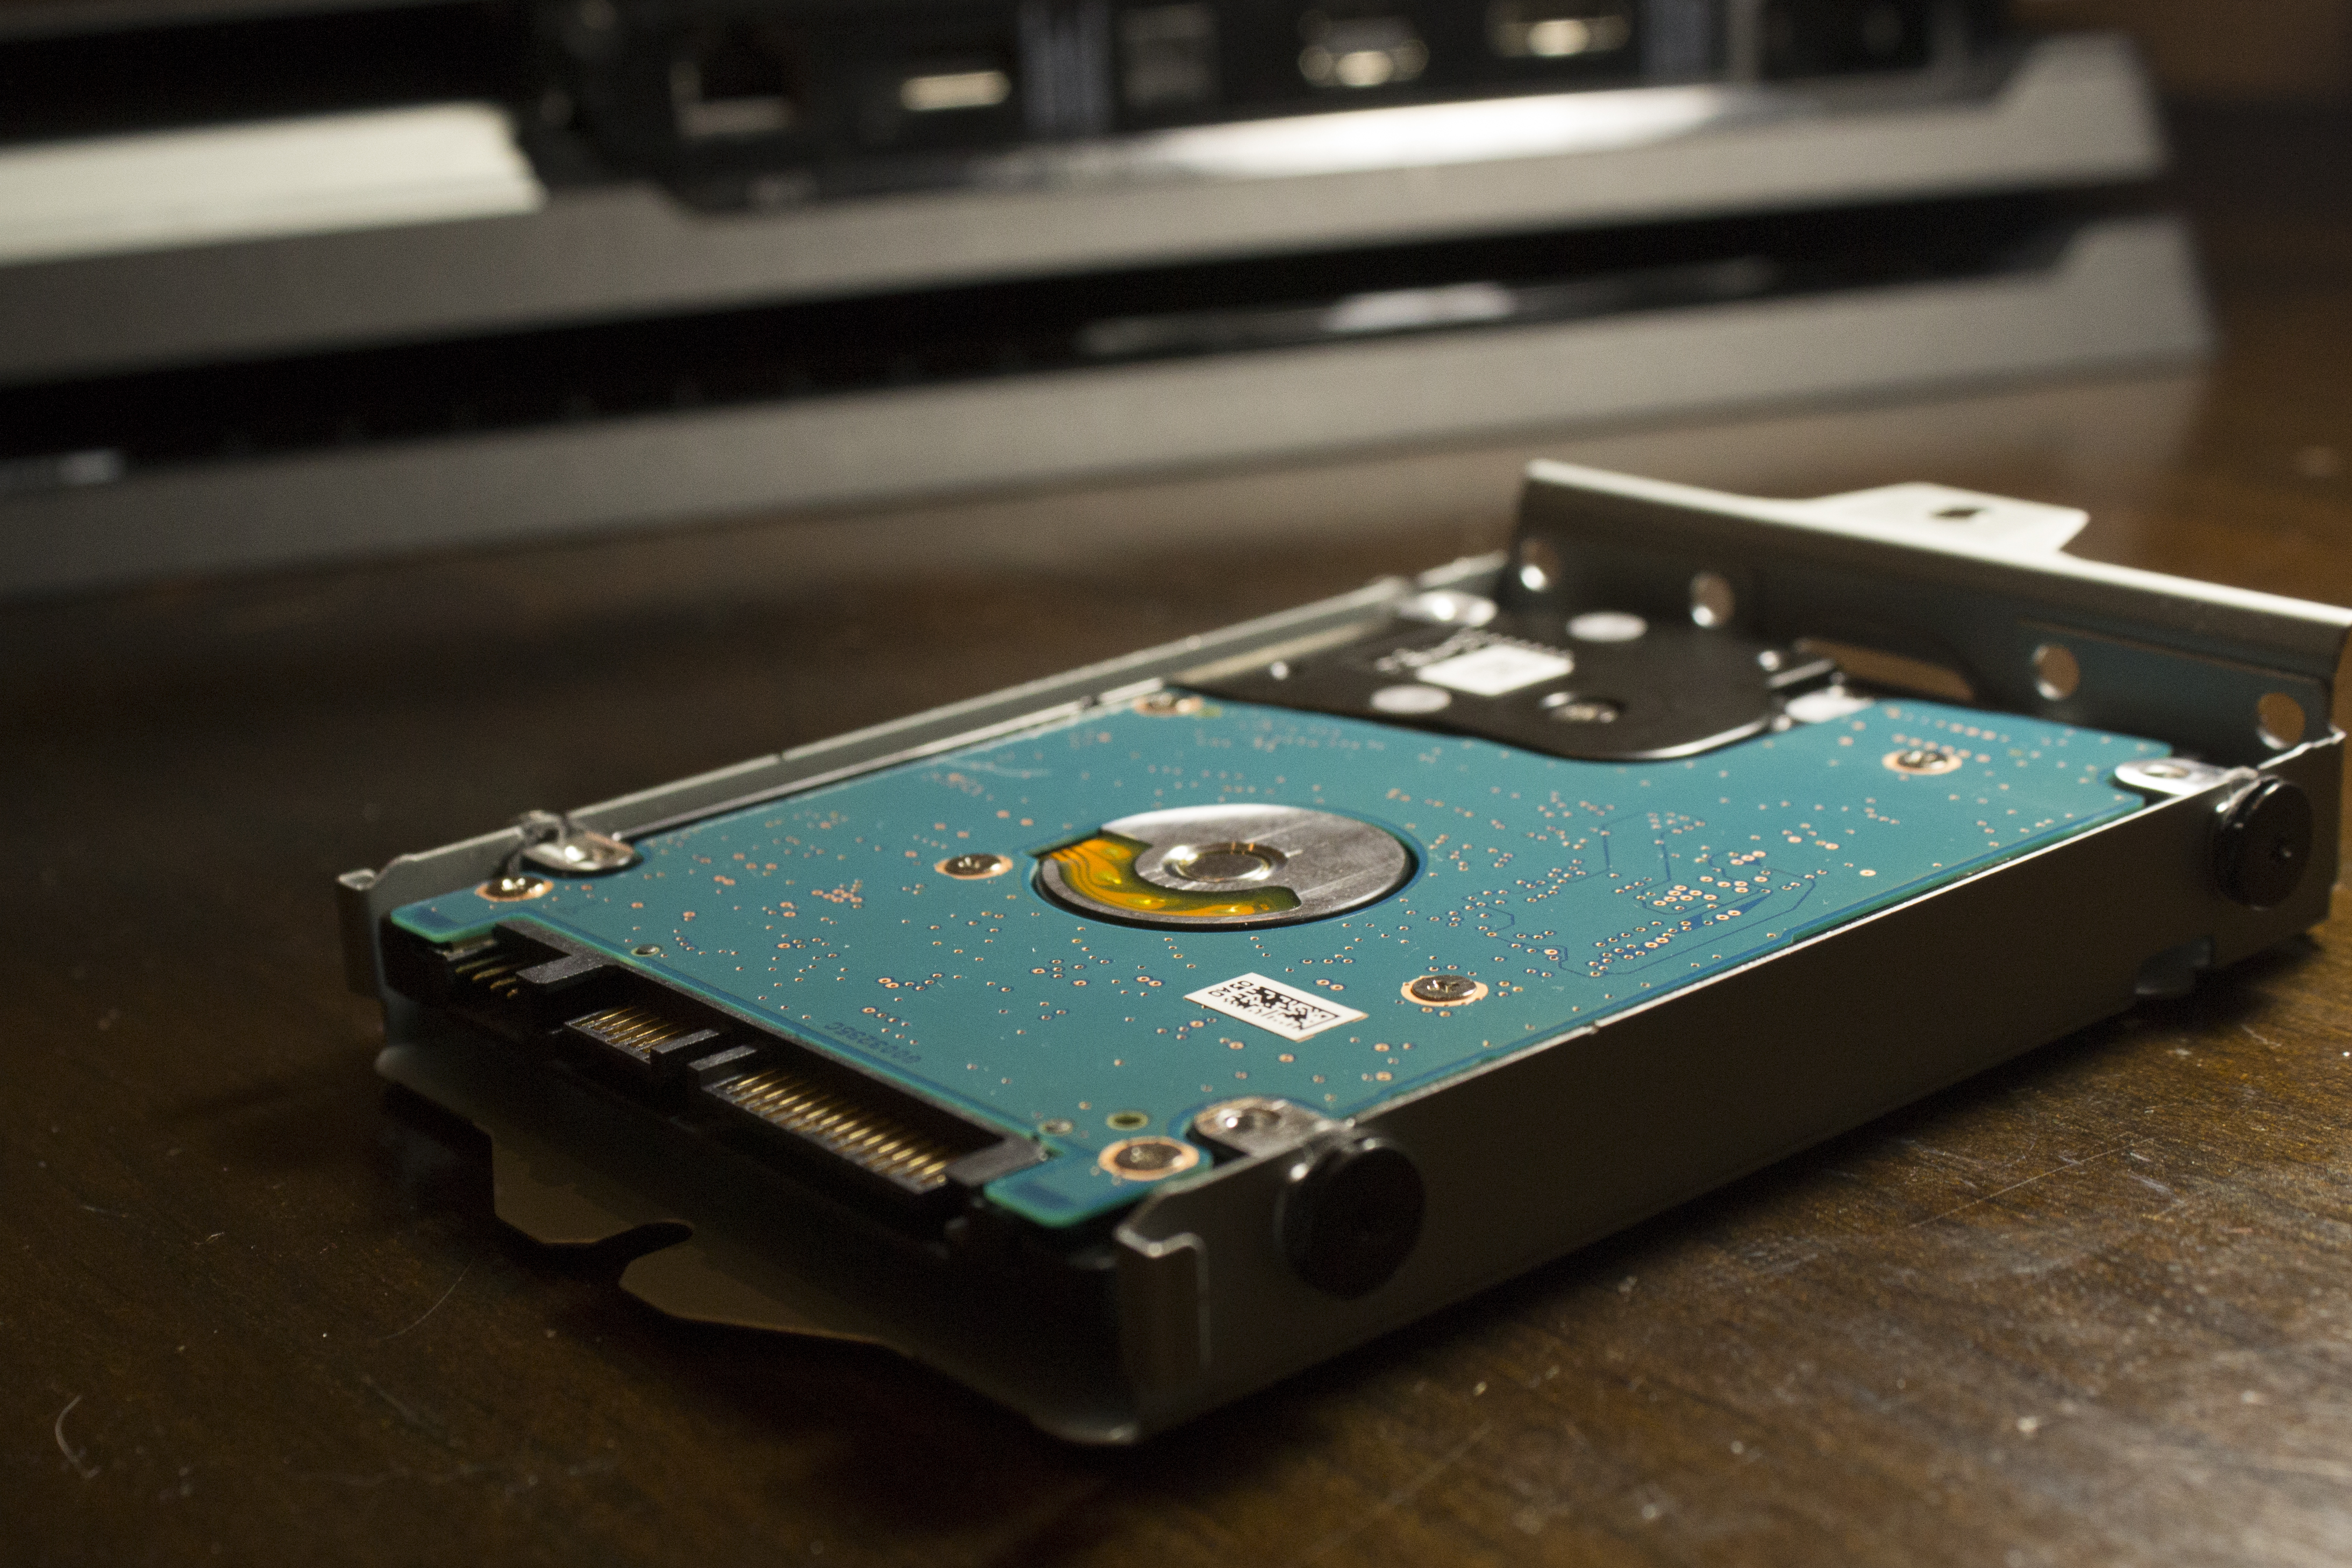 How to Upgrade Your PS4 Hard Drive